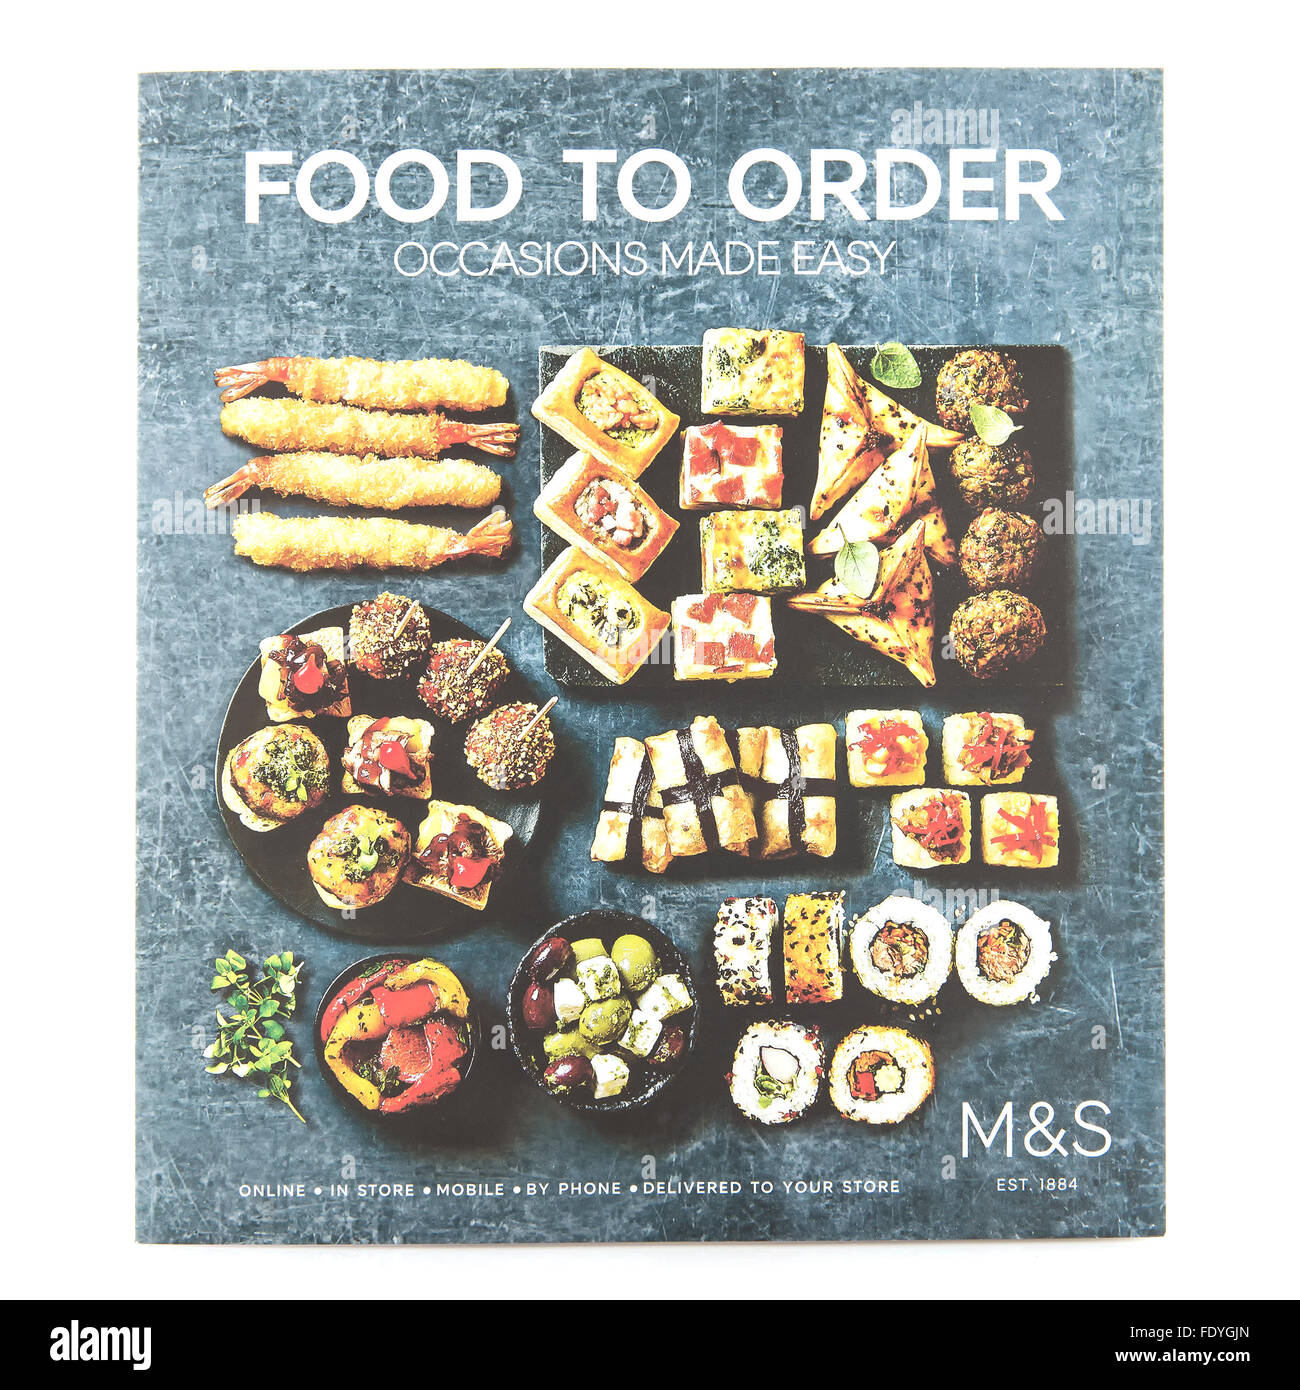 Food To Order by Marks & Spencer - Occasions Made Easy on a White Background Stock Photo